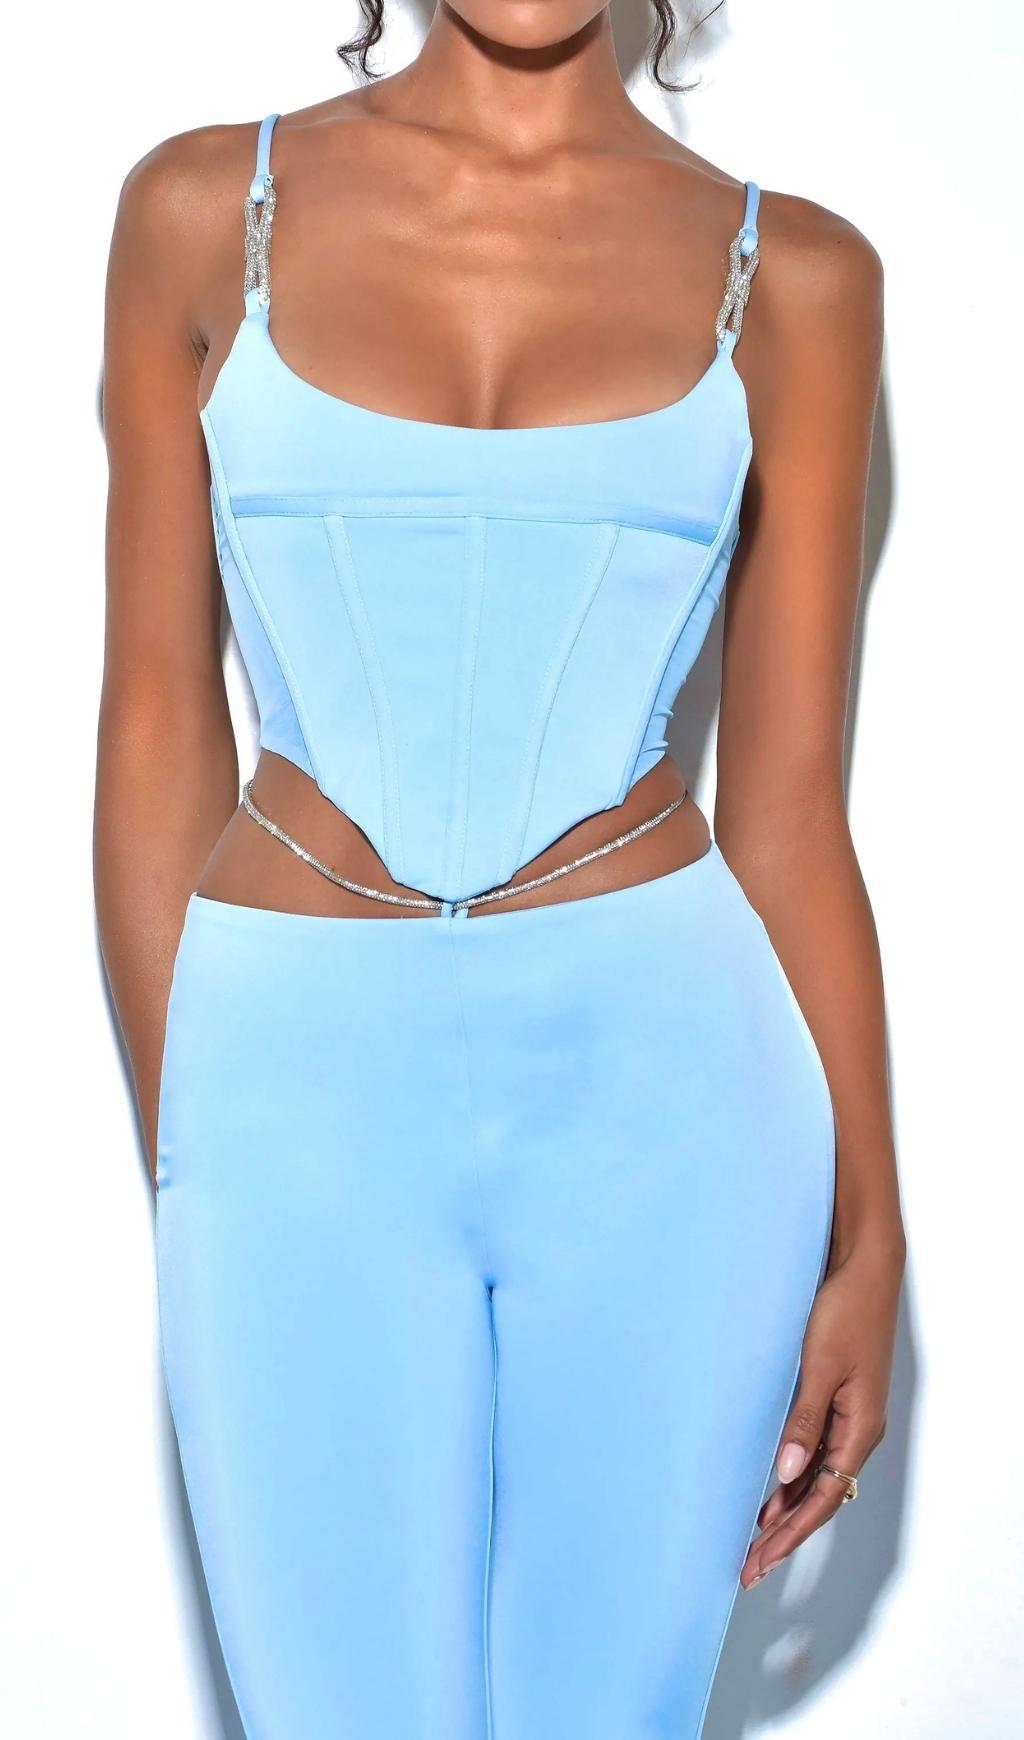 CORSET CAMISOLE TWO-PIECE SUIT IN BLUE